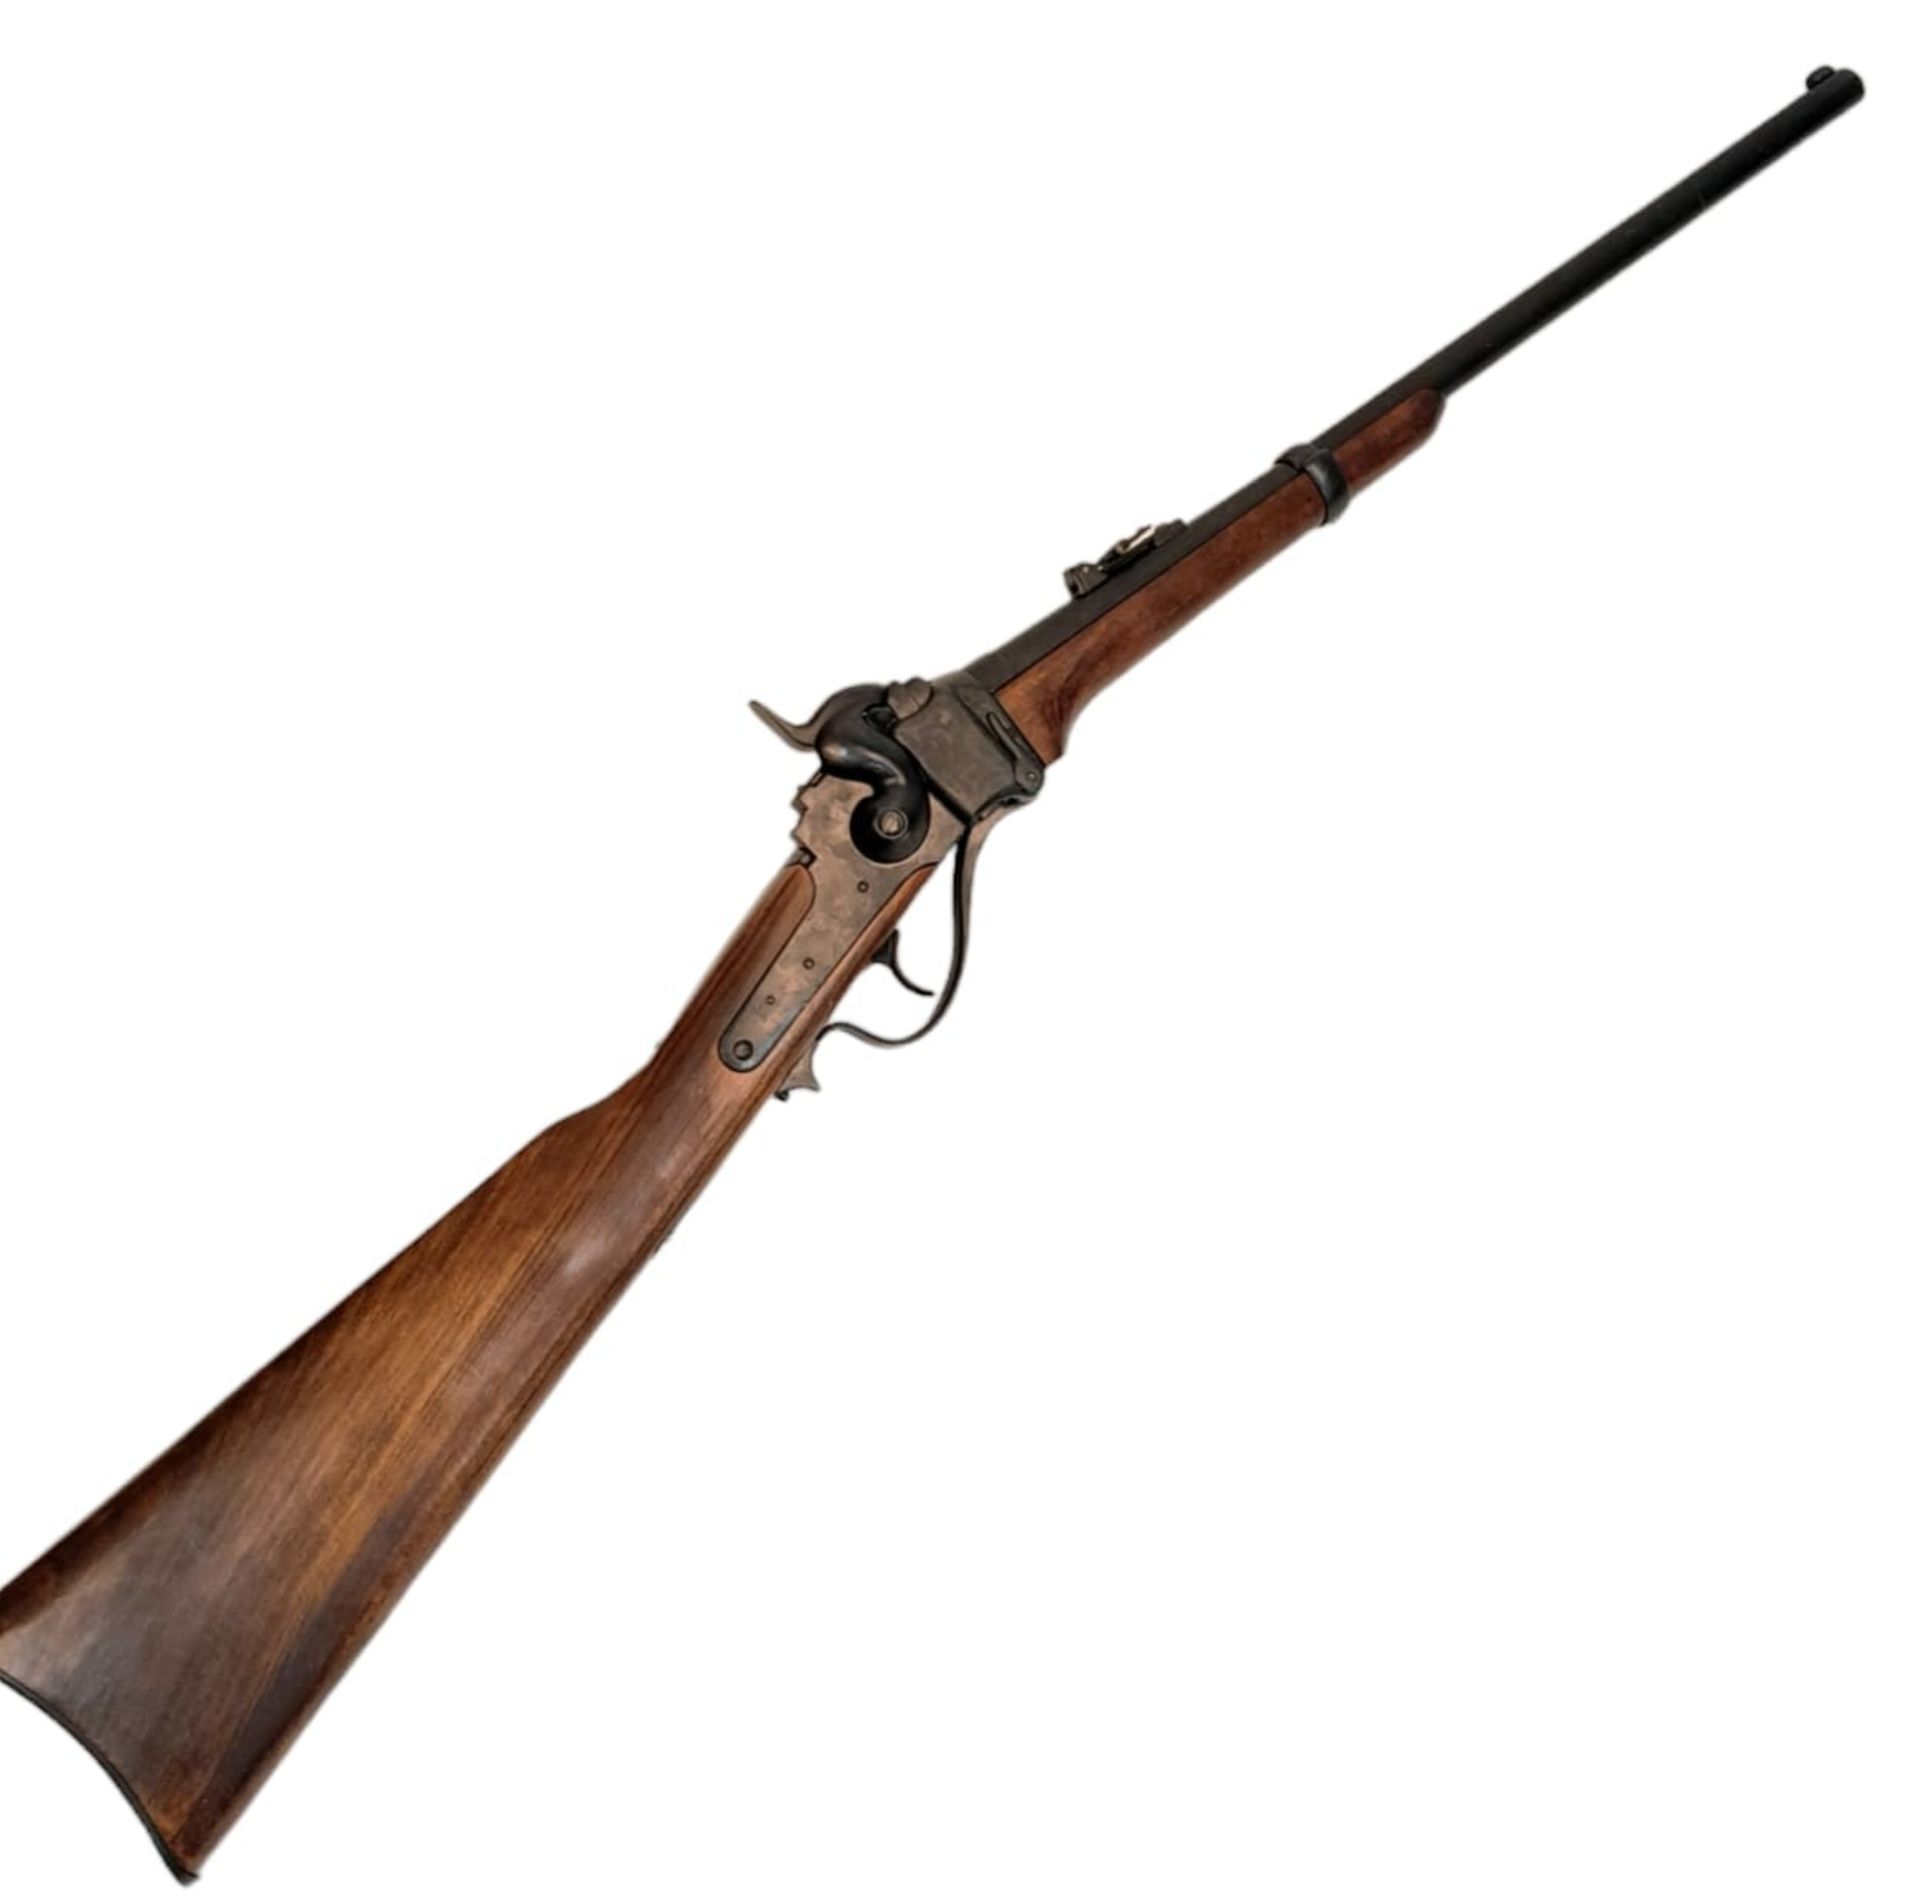 A Vintage, Full Weight and Size, Retrospective Inert Replica of an 1859 Carbine Rifle. Wood and - Image 2 of 11